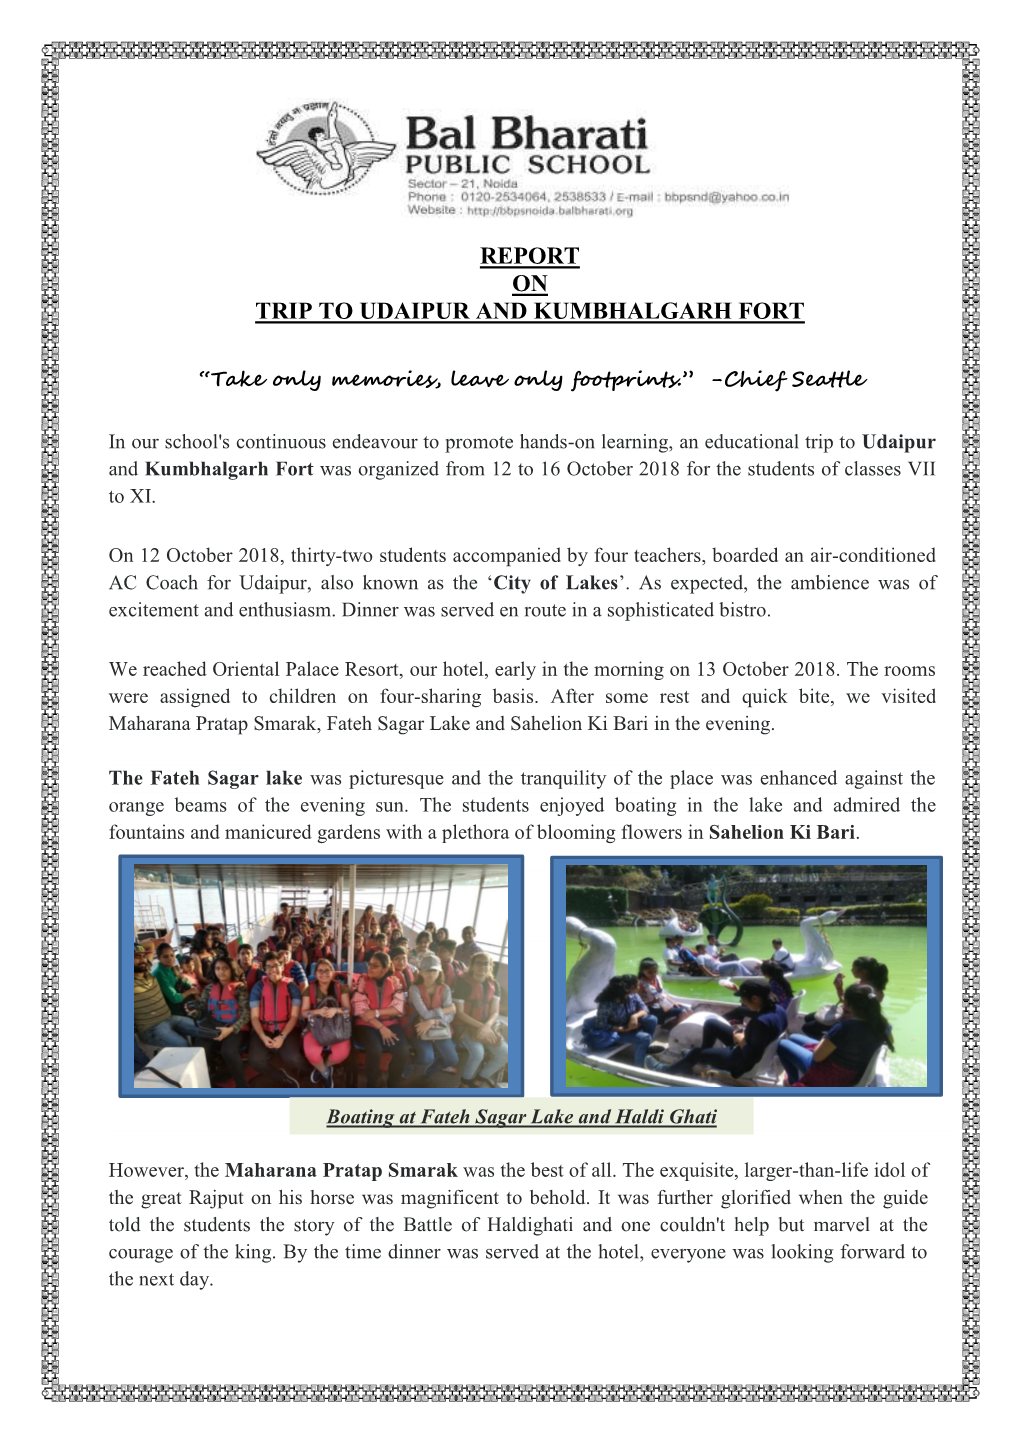 Report on Trip to Udaipur and Kumbhalgarh Fort